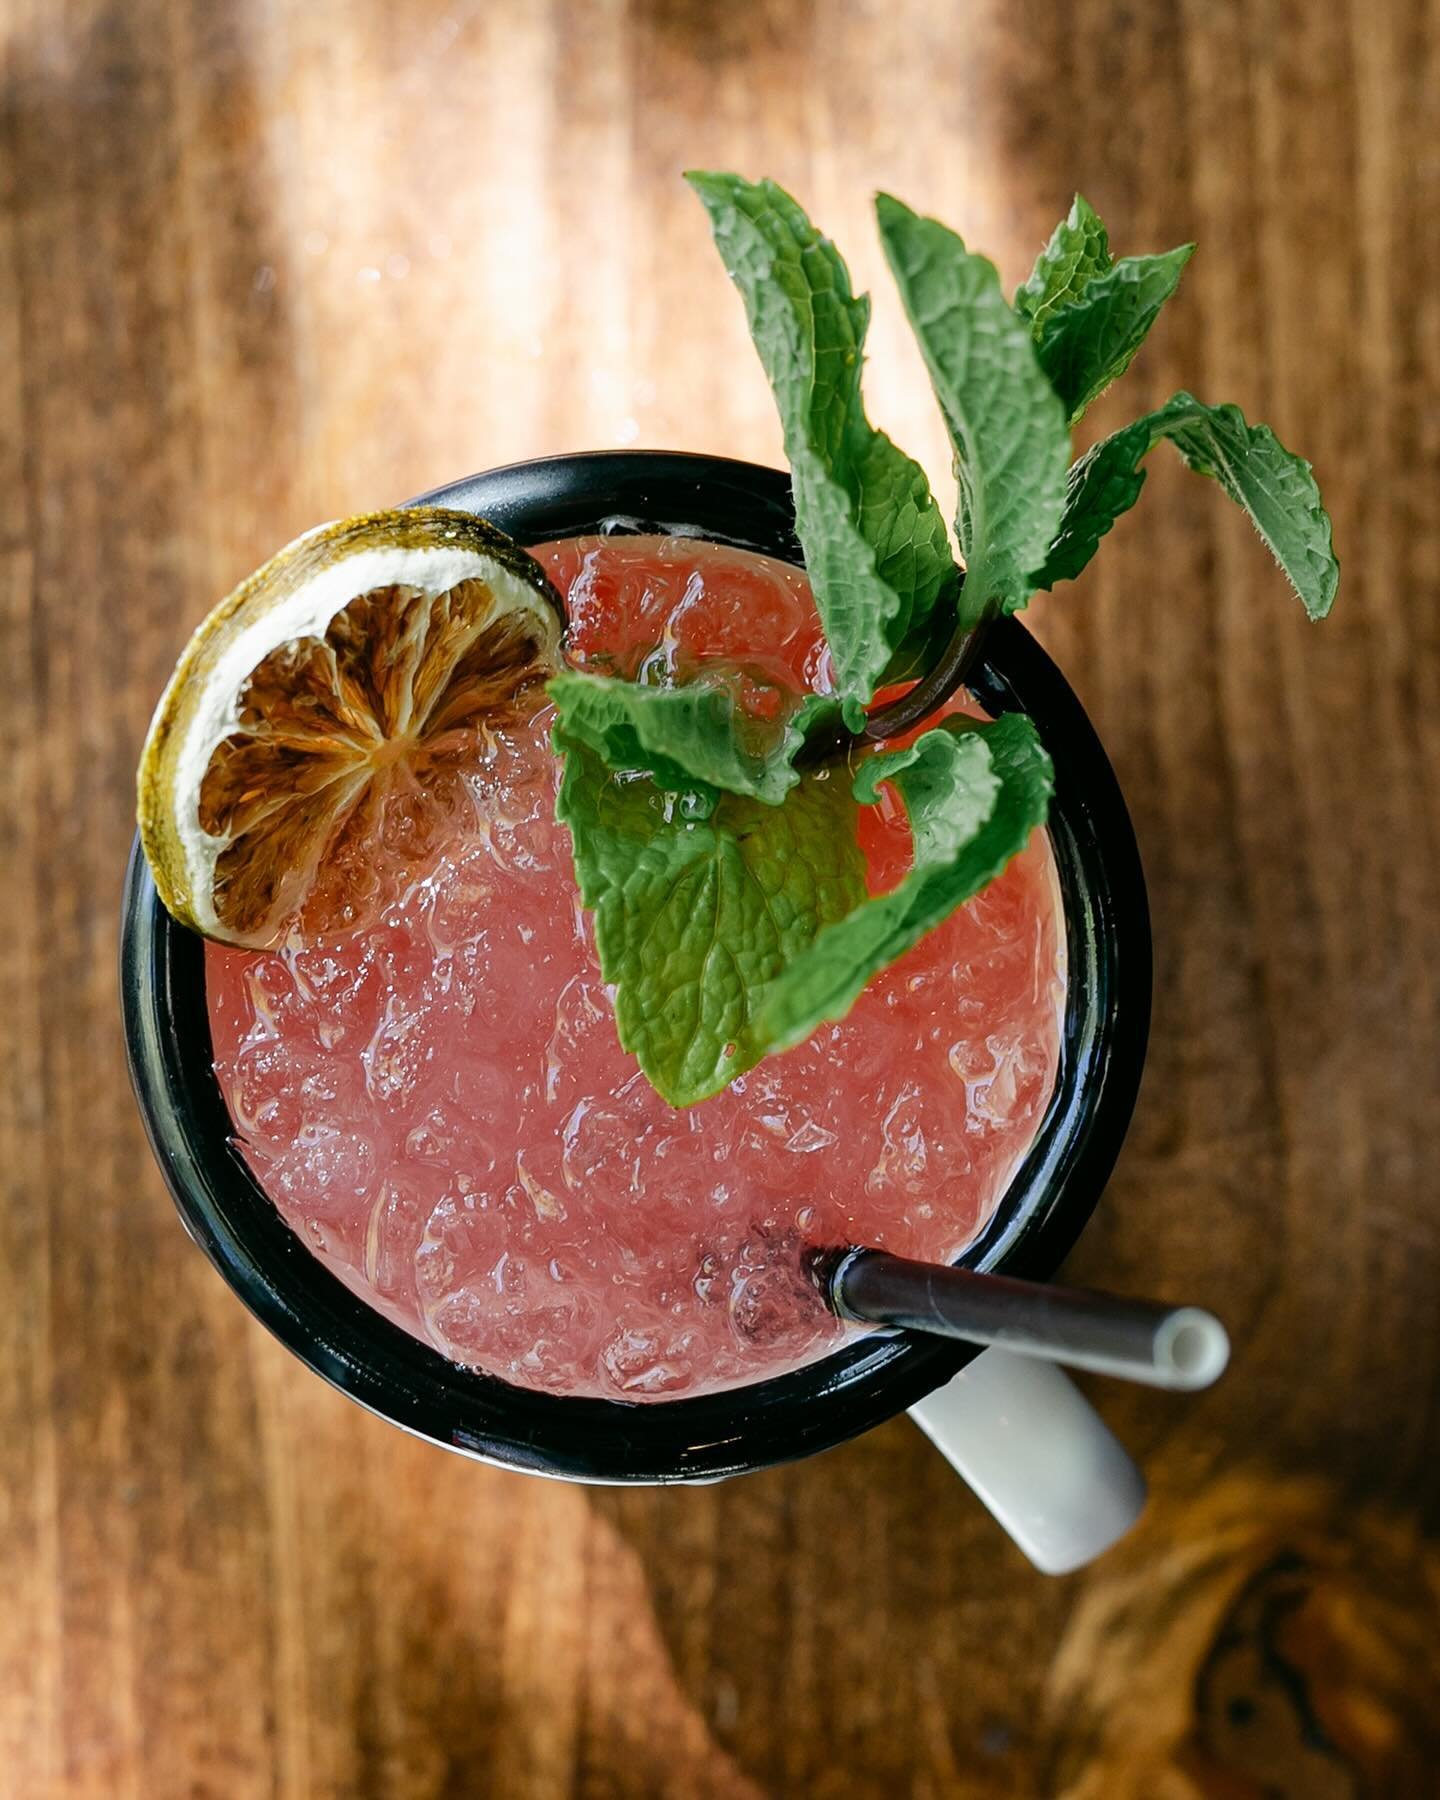 ☀️ Our Spring Rhubarb Mule pairs perfectly with a warm breeze and open windows which is exactly what Portland has going on today! Come on in&hellip;we&rsquo;re open from 3-10p!

Spring Mule: Vodka, Rhubarb-Mint Shrub, Lime, Ginger
.
.
.
.
#pdxfiresid